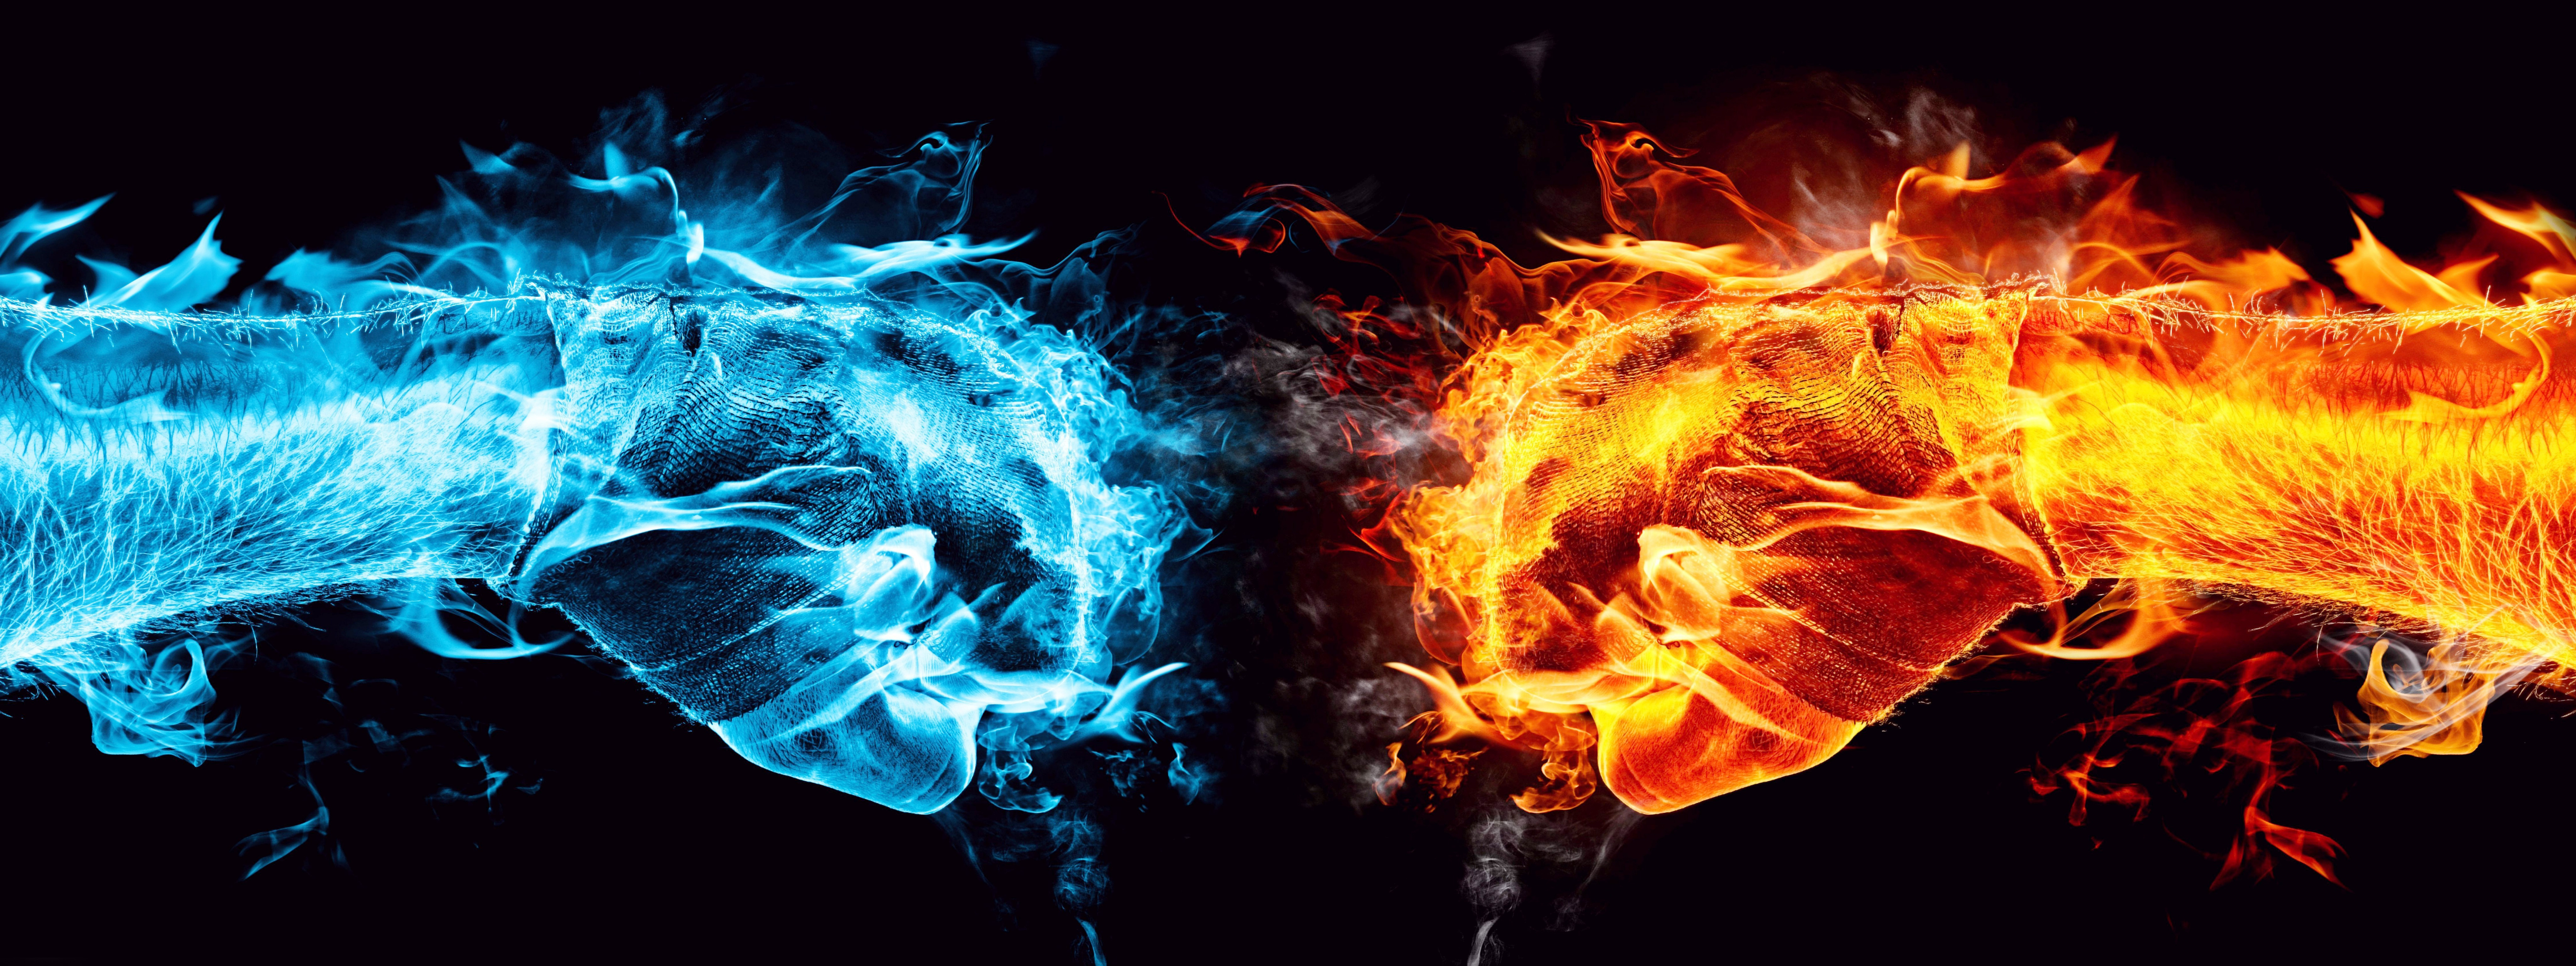 Water And Fire Fists Battle Dual Screen Wallpapers HD / Desktop and